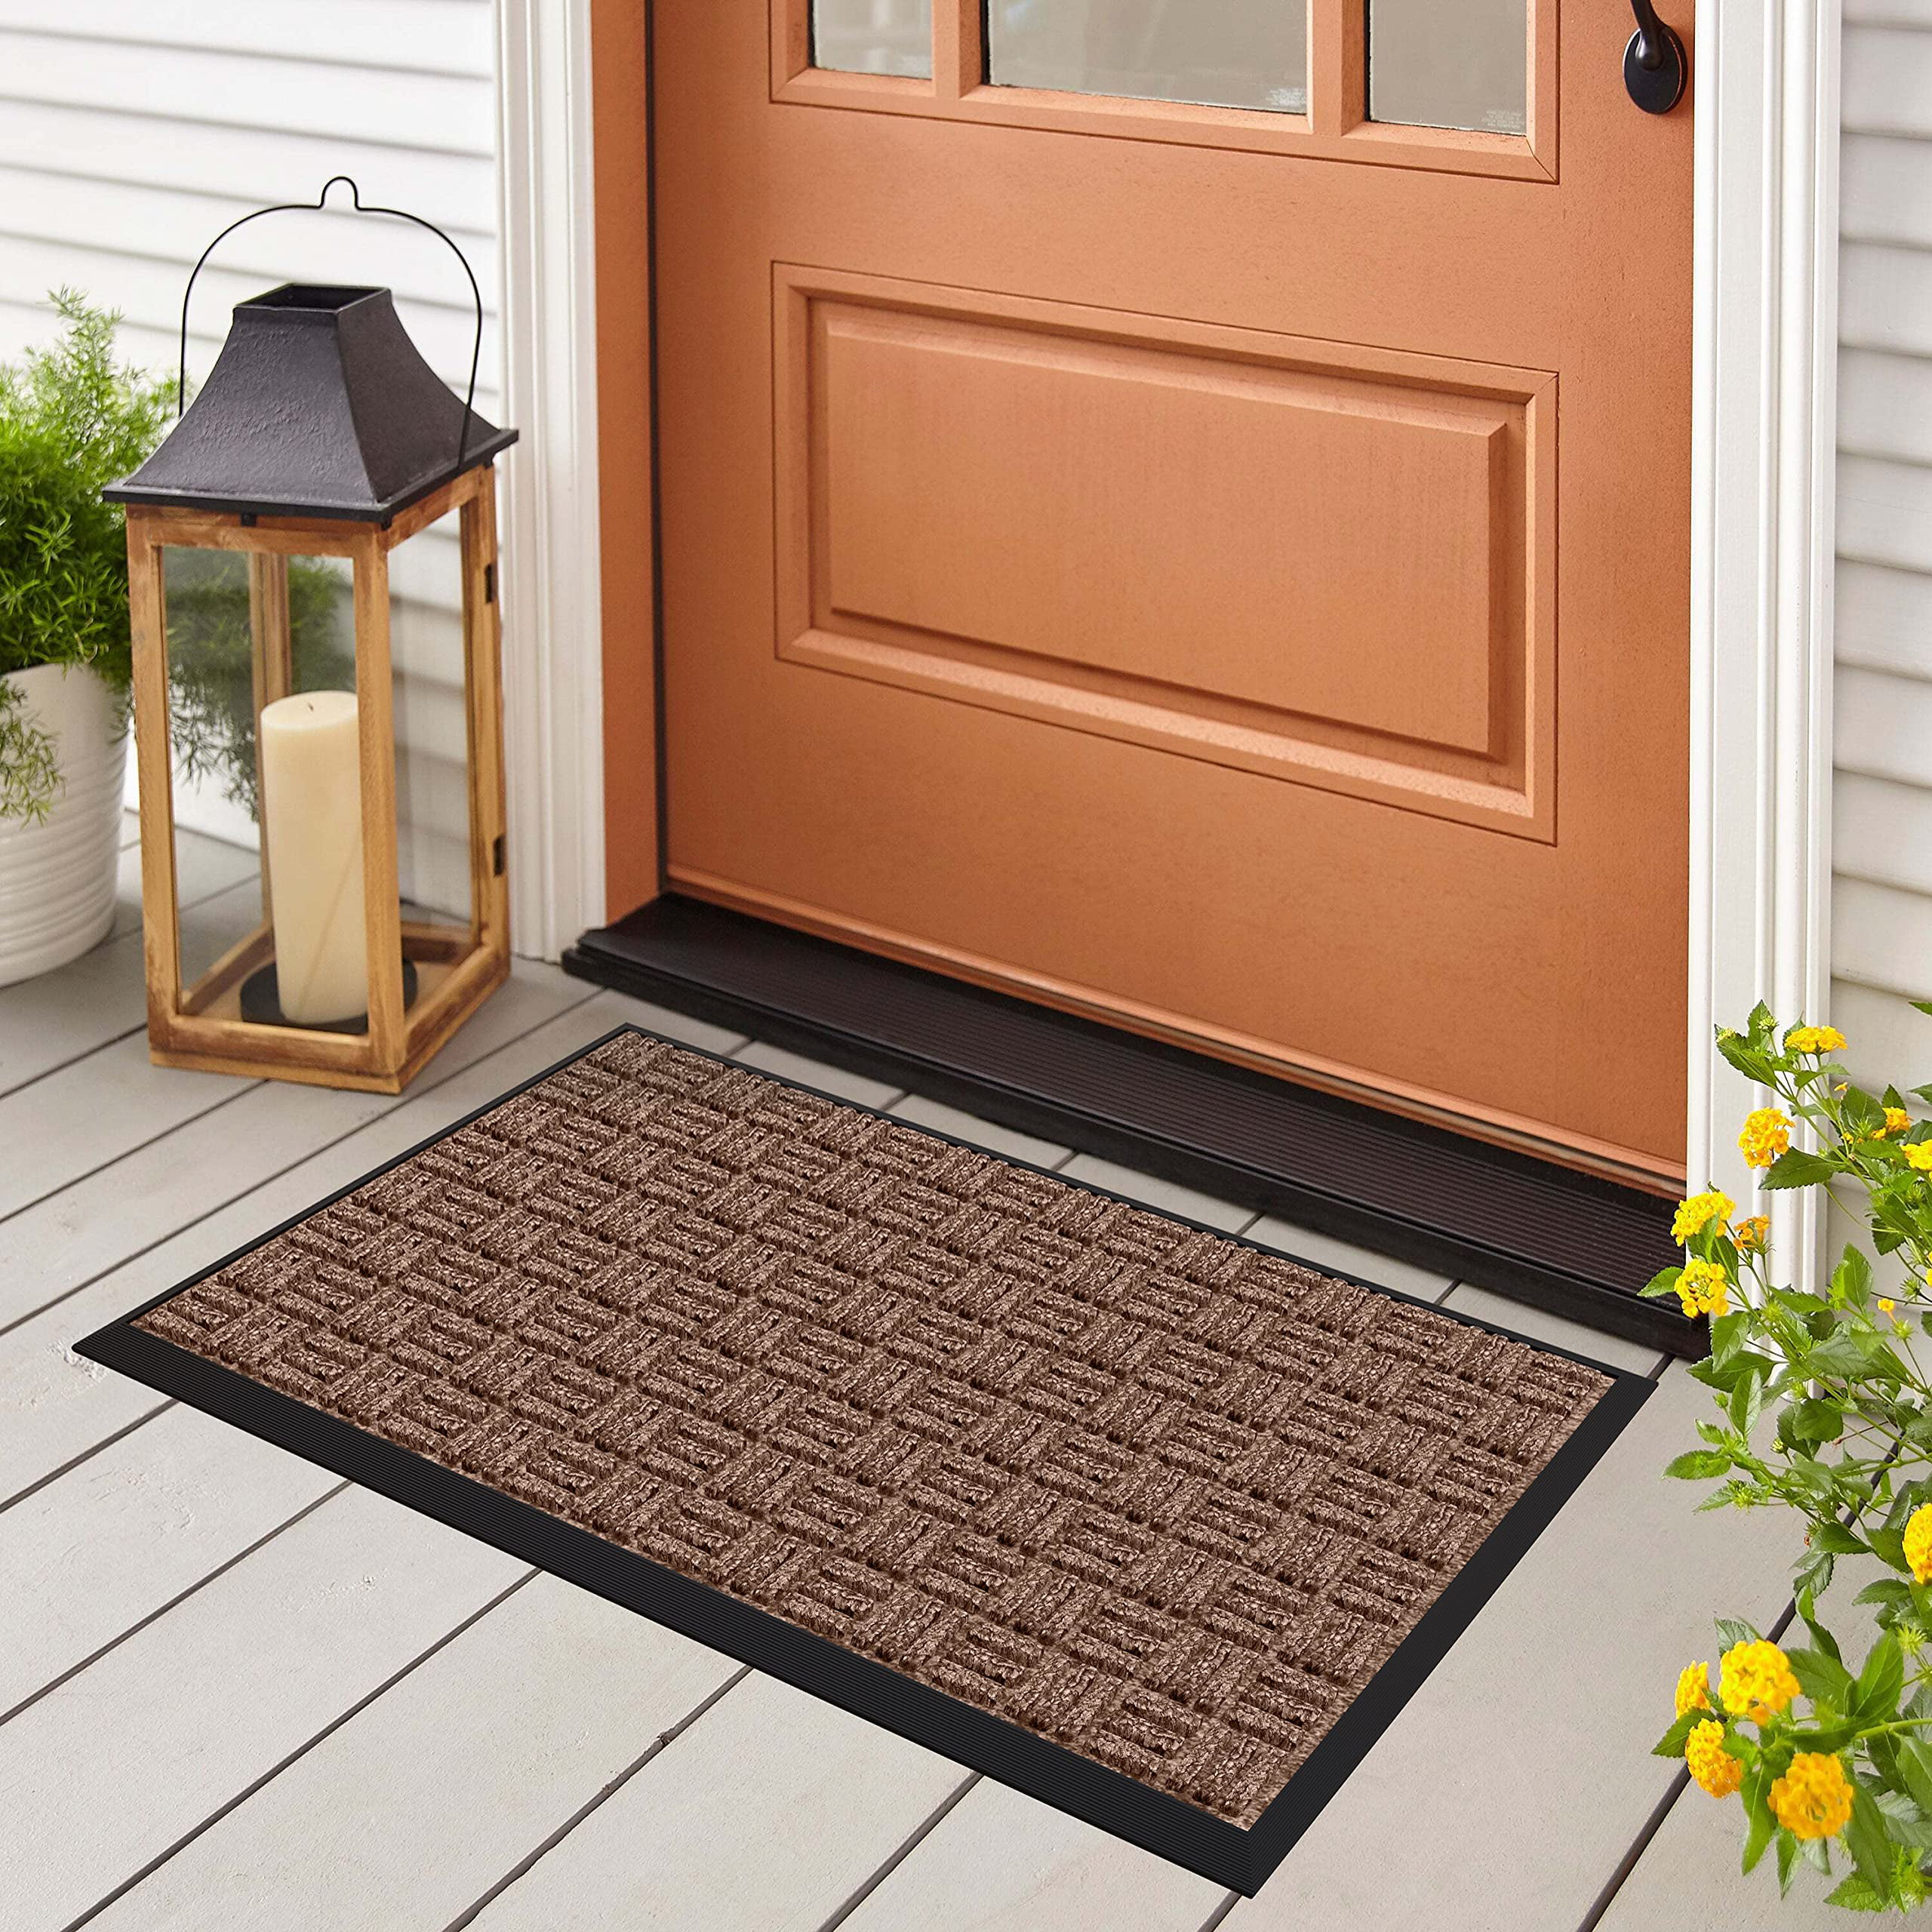 LuxUrux Extra Large Welcome Mats Outdoor Coco Coir Doormat, with Heavy-Duty  PVC Backing - Natural - Perfect Color/Sizing for Outdoor/Indoor uses. (24